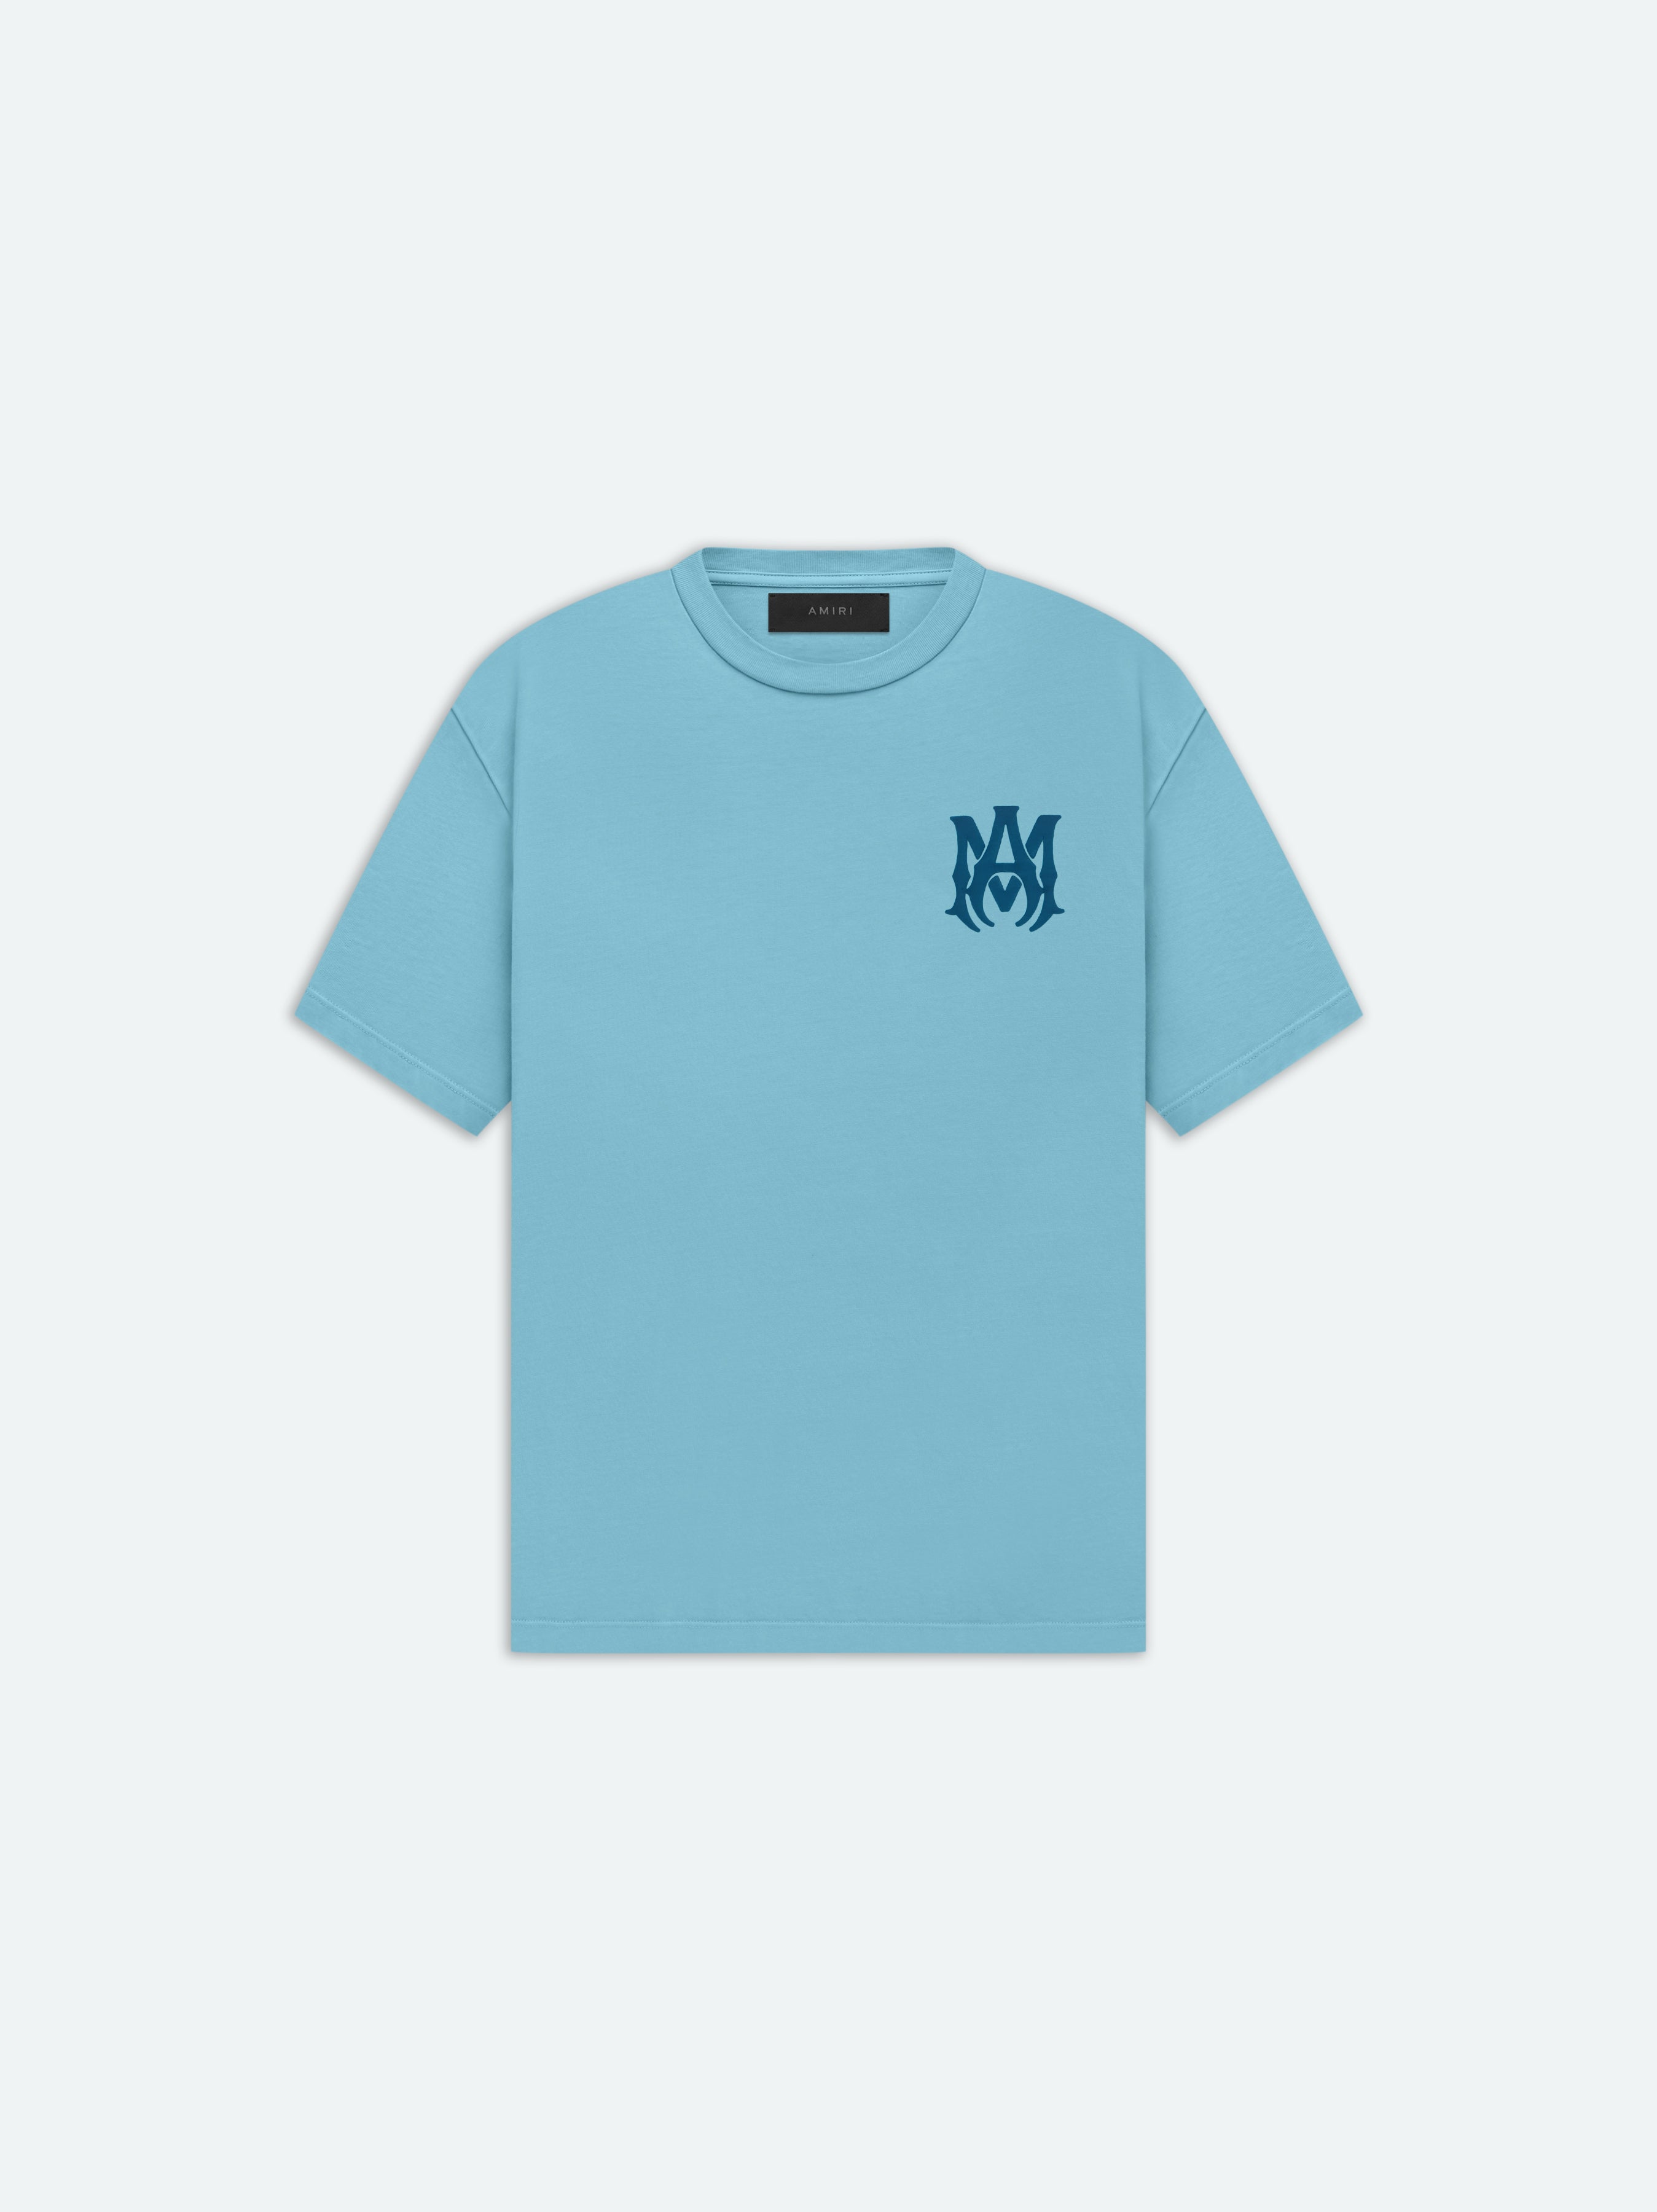 Product MA LOGO TEE - Air Blue featured image